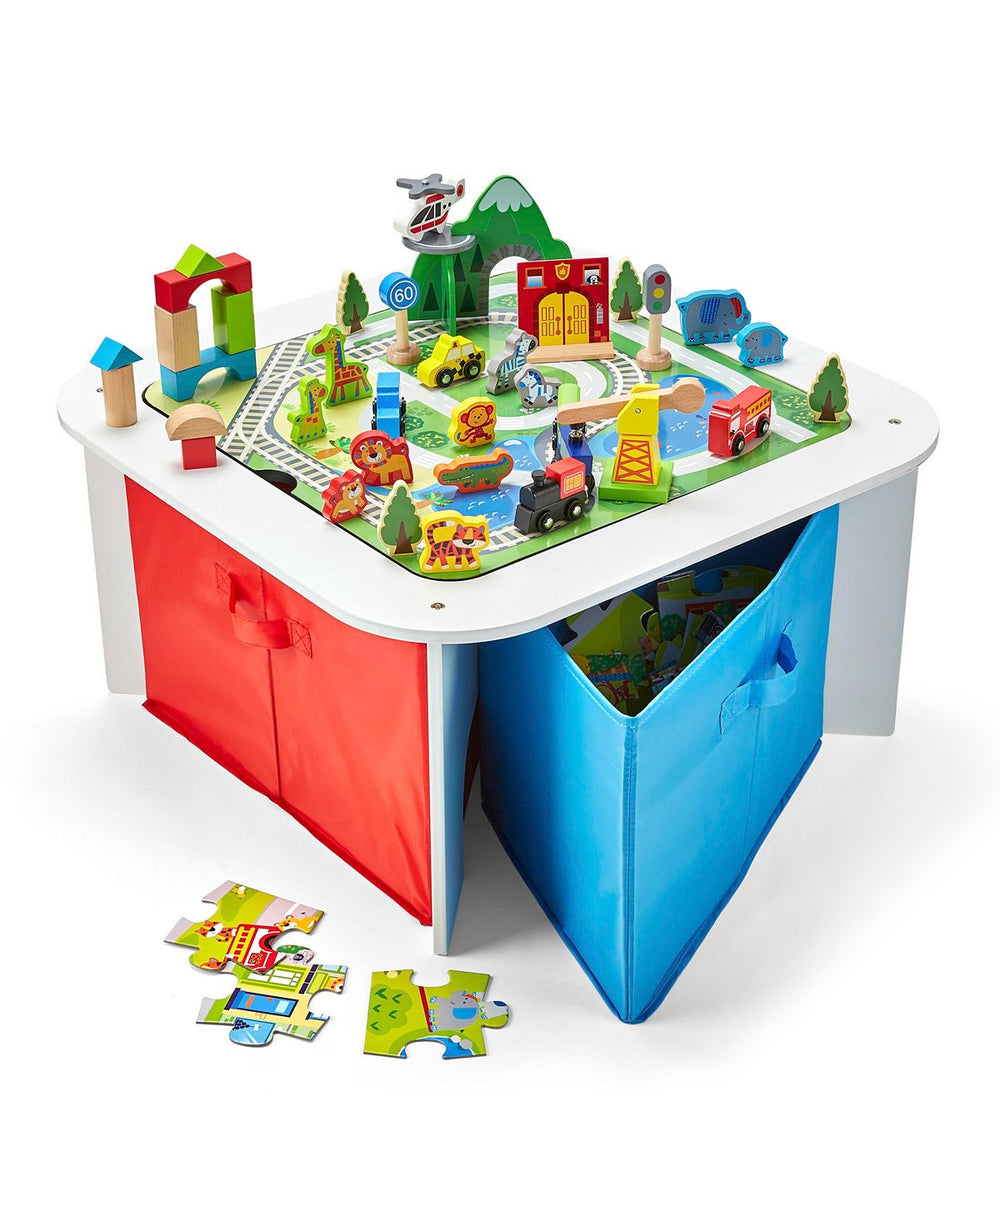 Imaginarium Ready to Play Multi-Activity Table Set - Toys R Us Exclusive